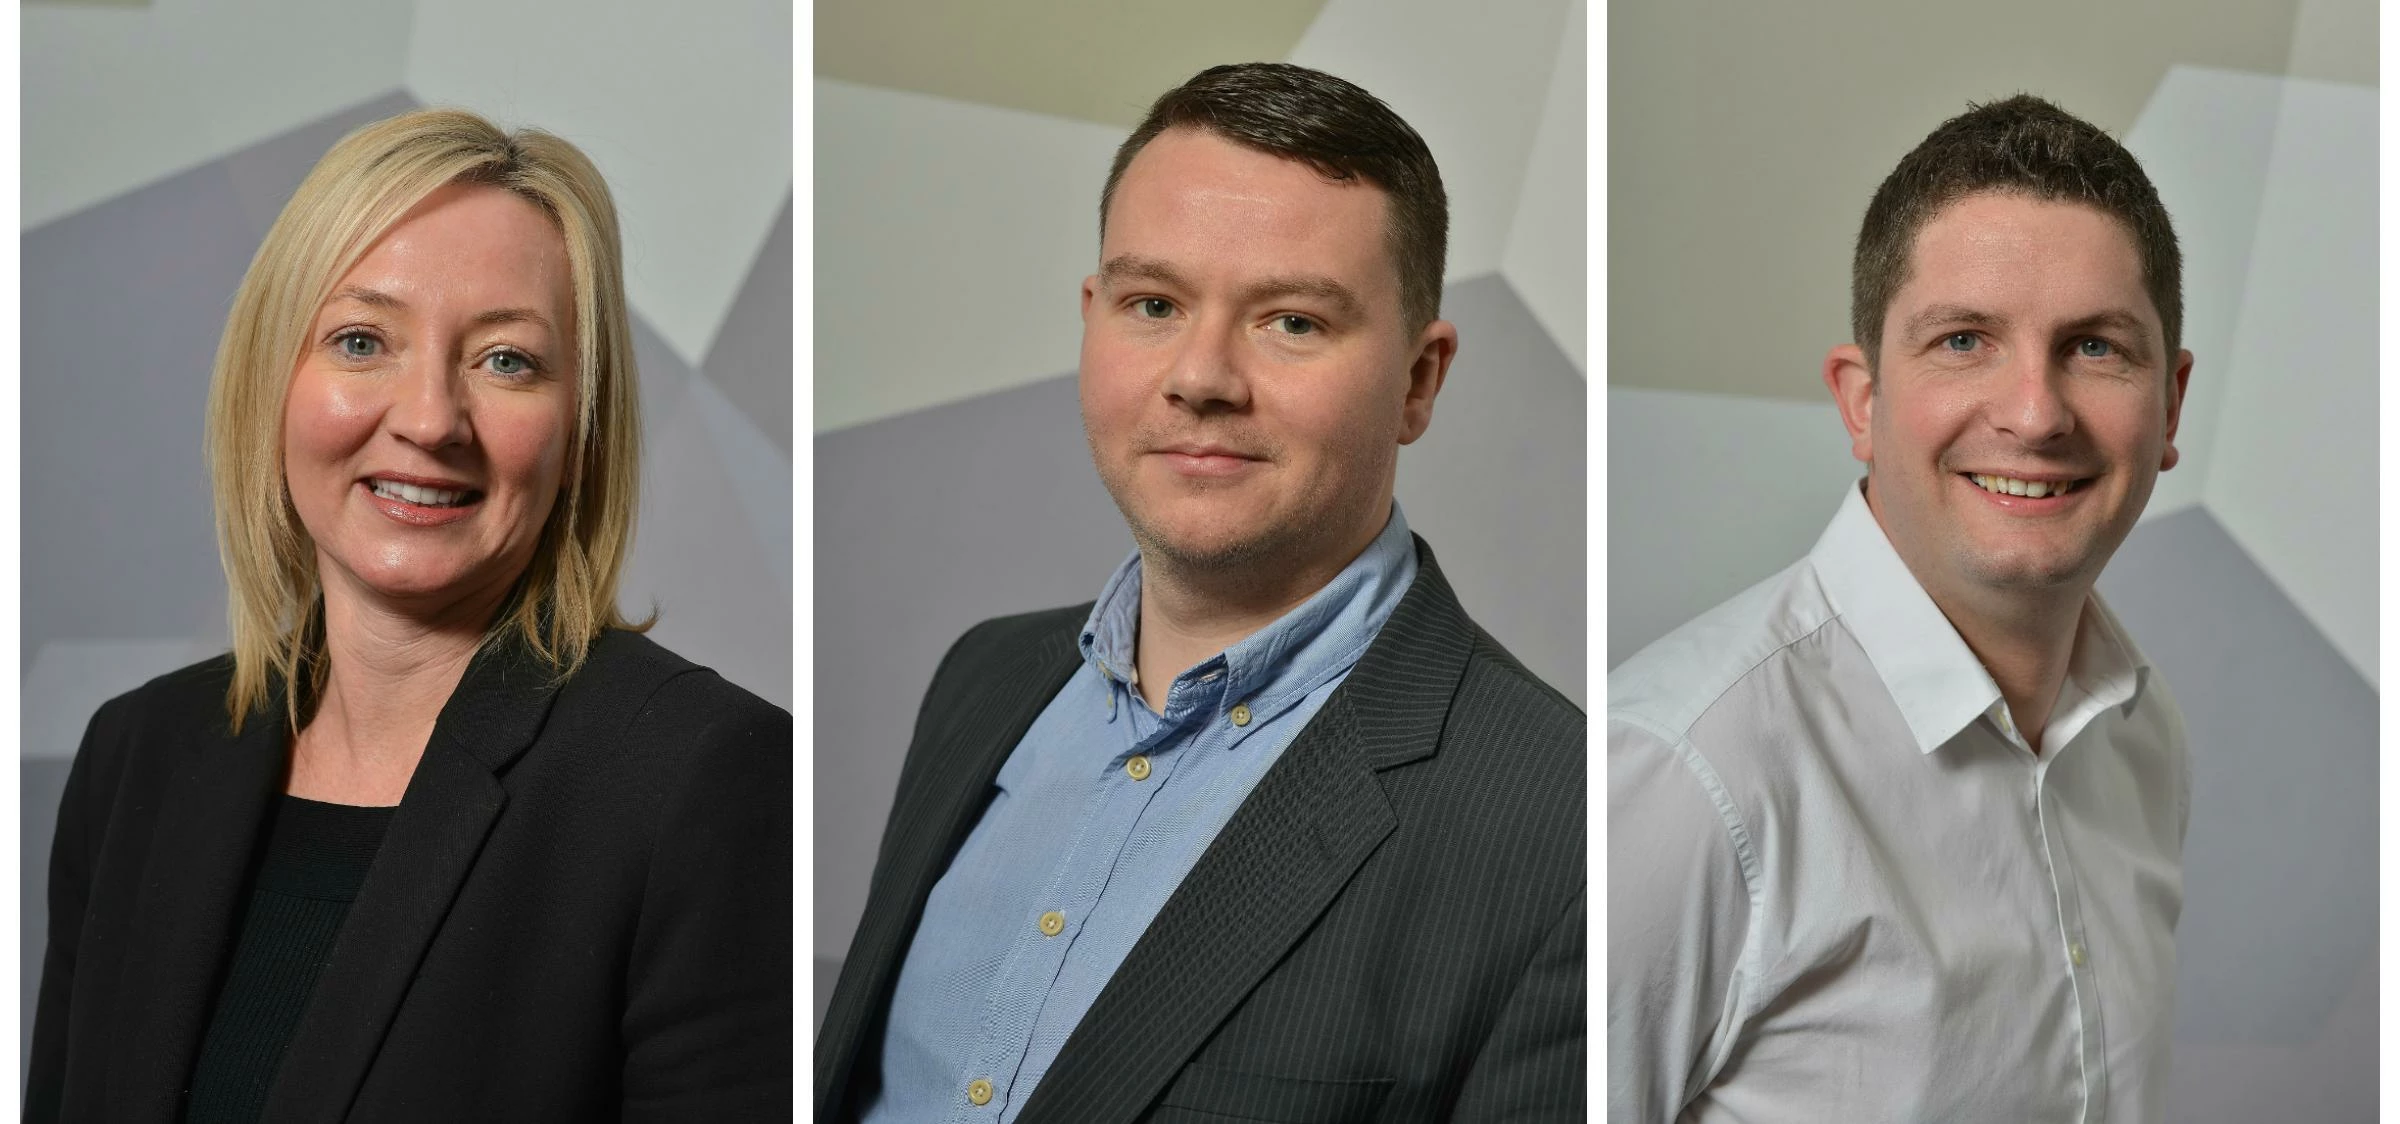 Hat trick of senior appointments at Carfinance247